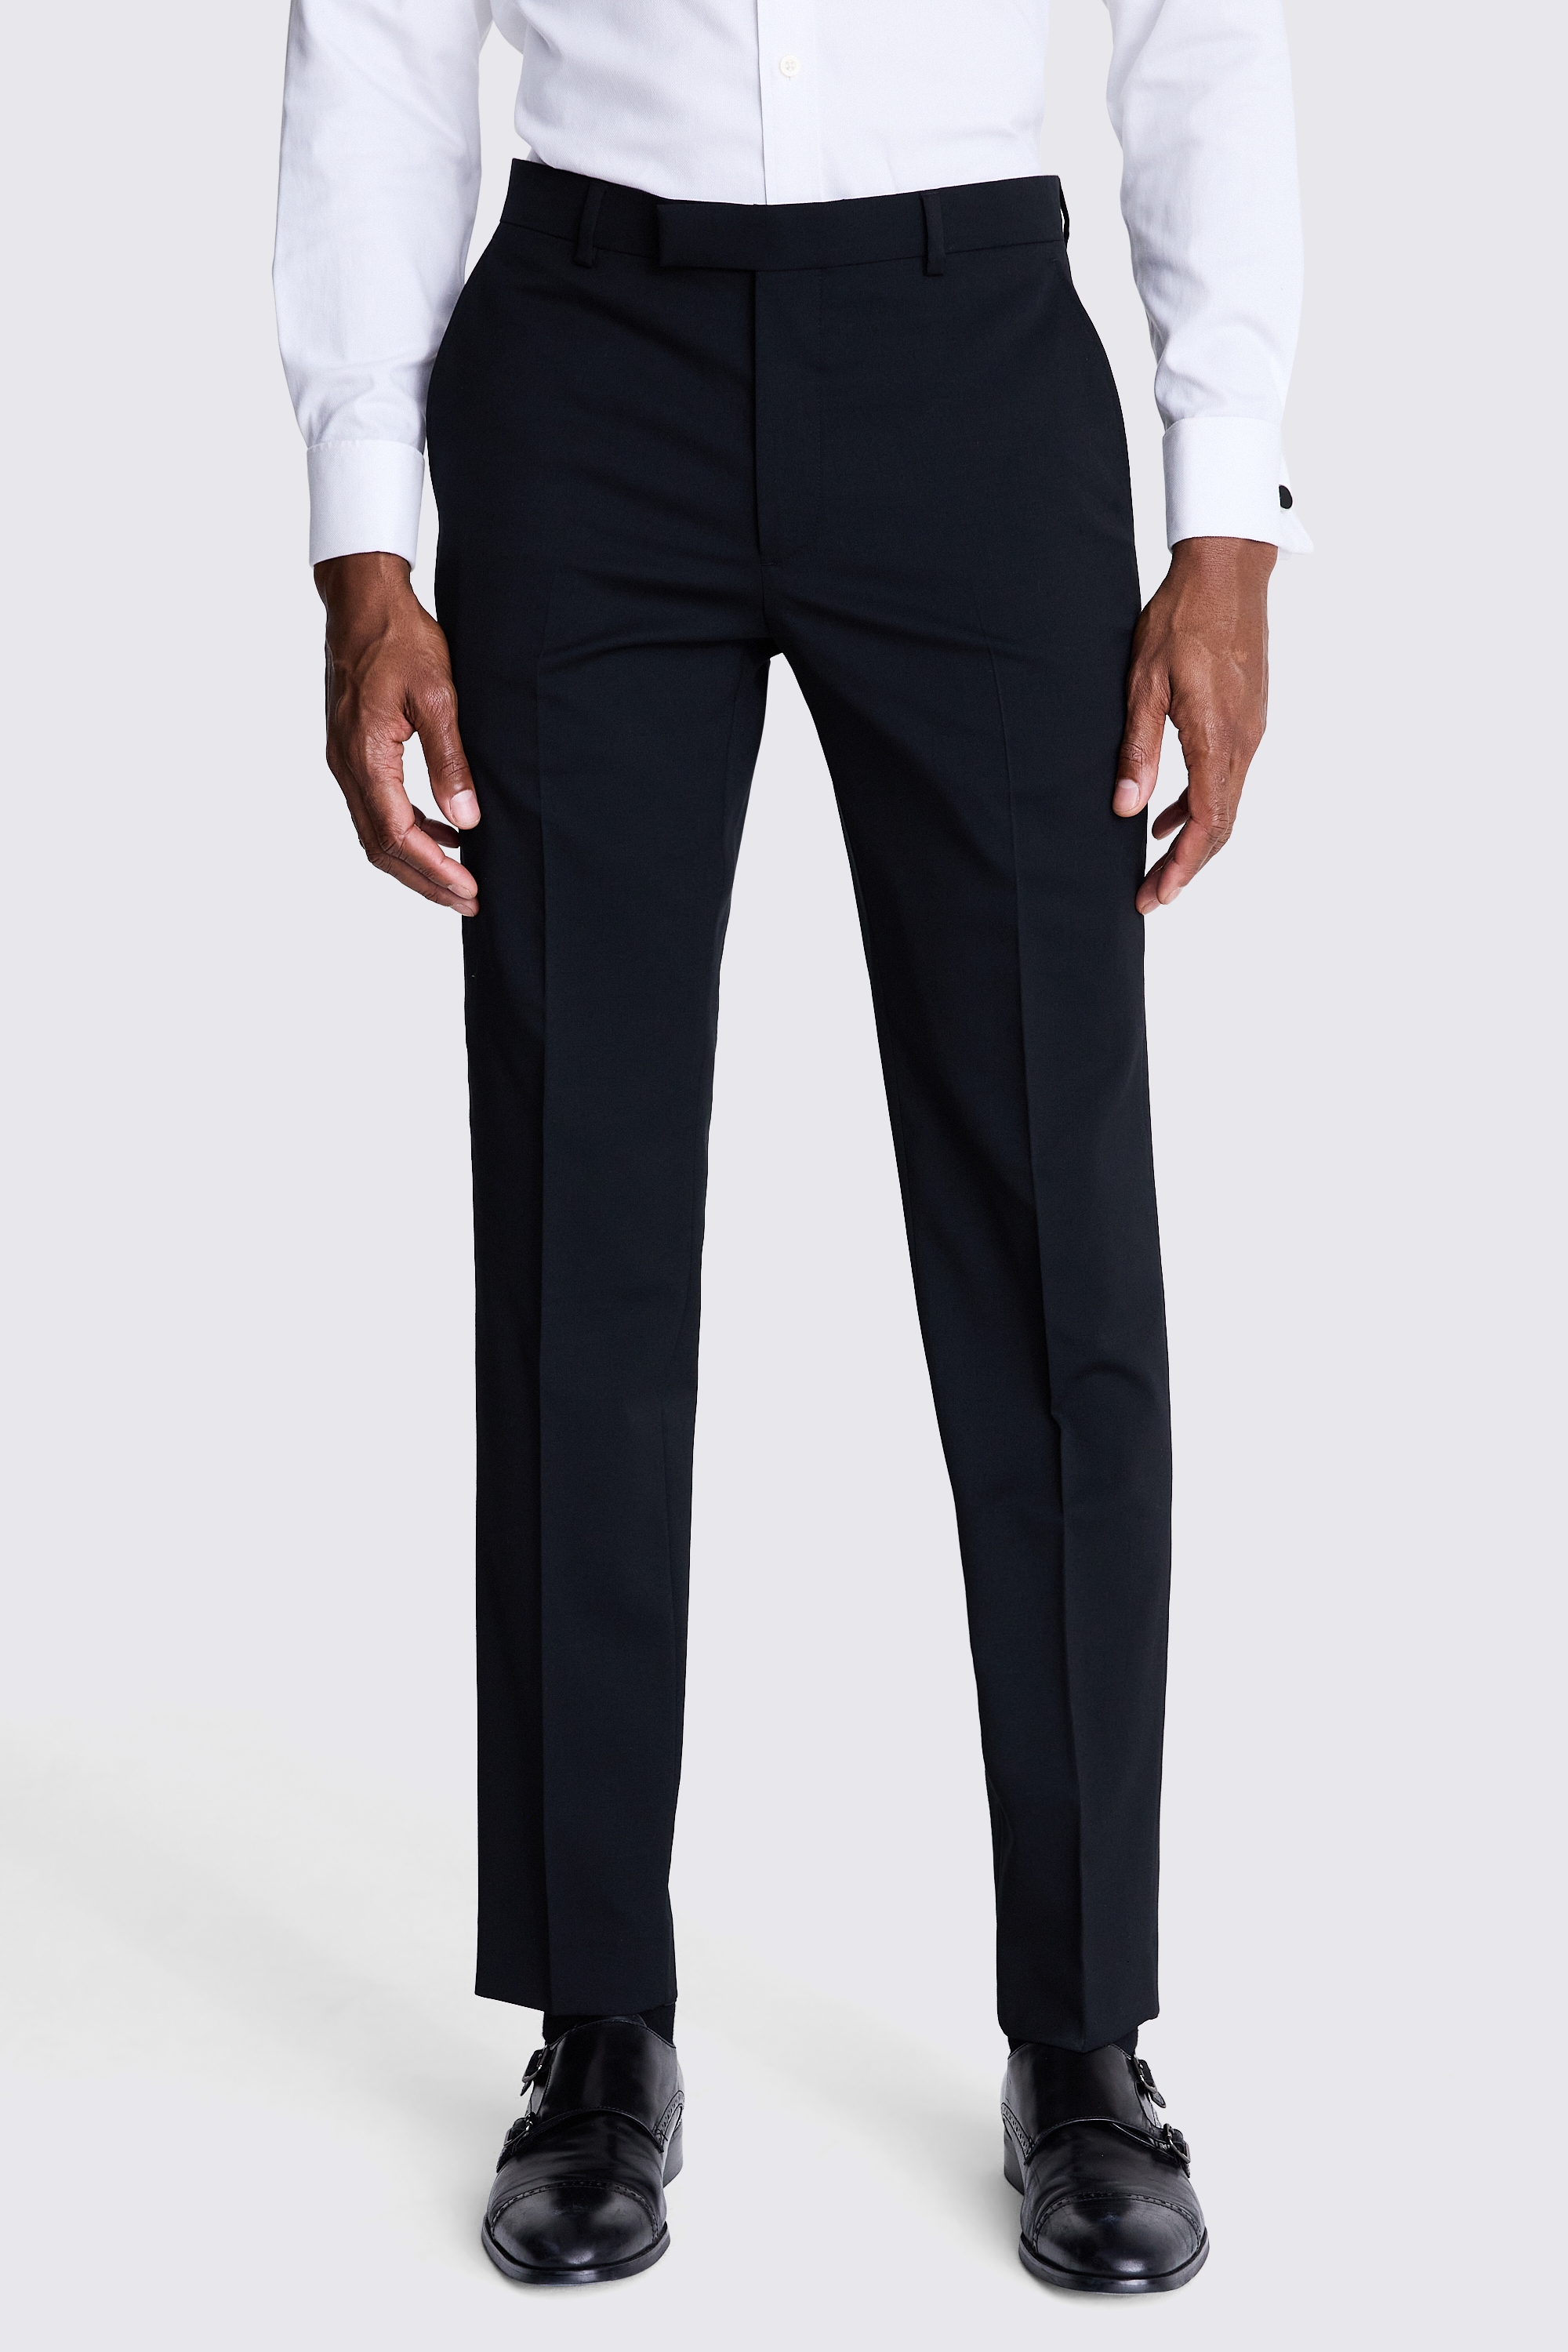 Tailored Fit Black Twill Eco Trousers | Buy Online at Moss